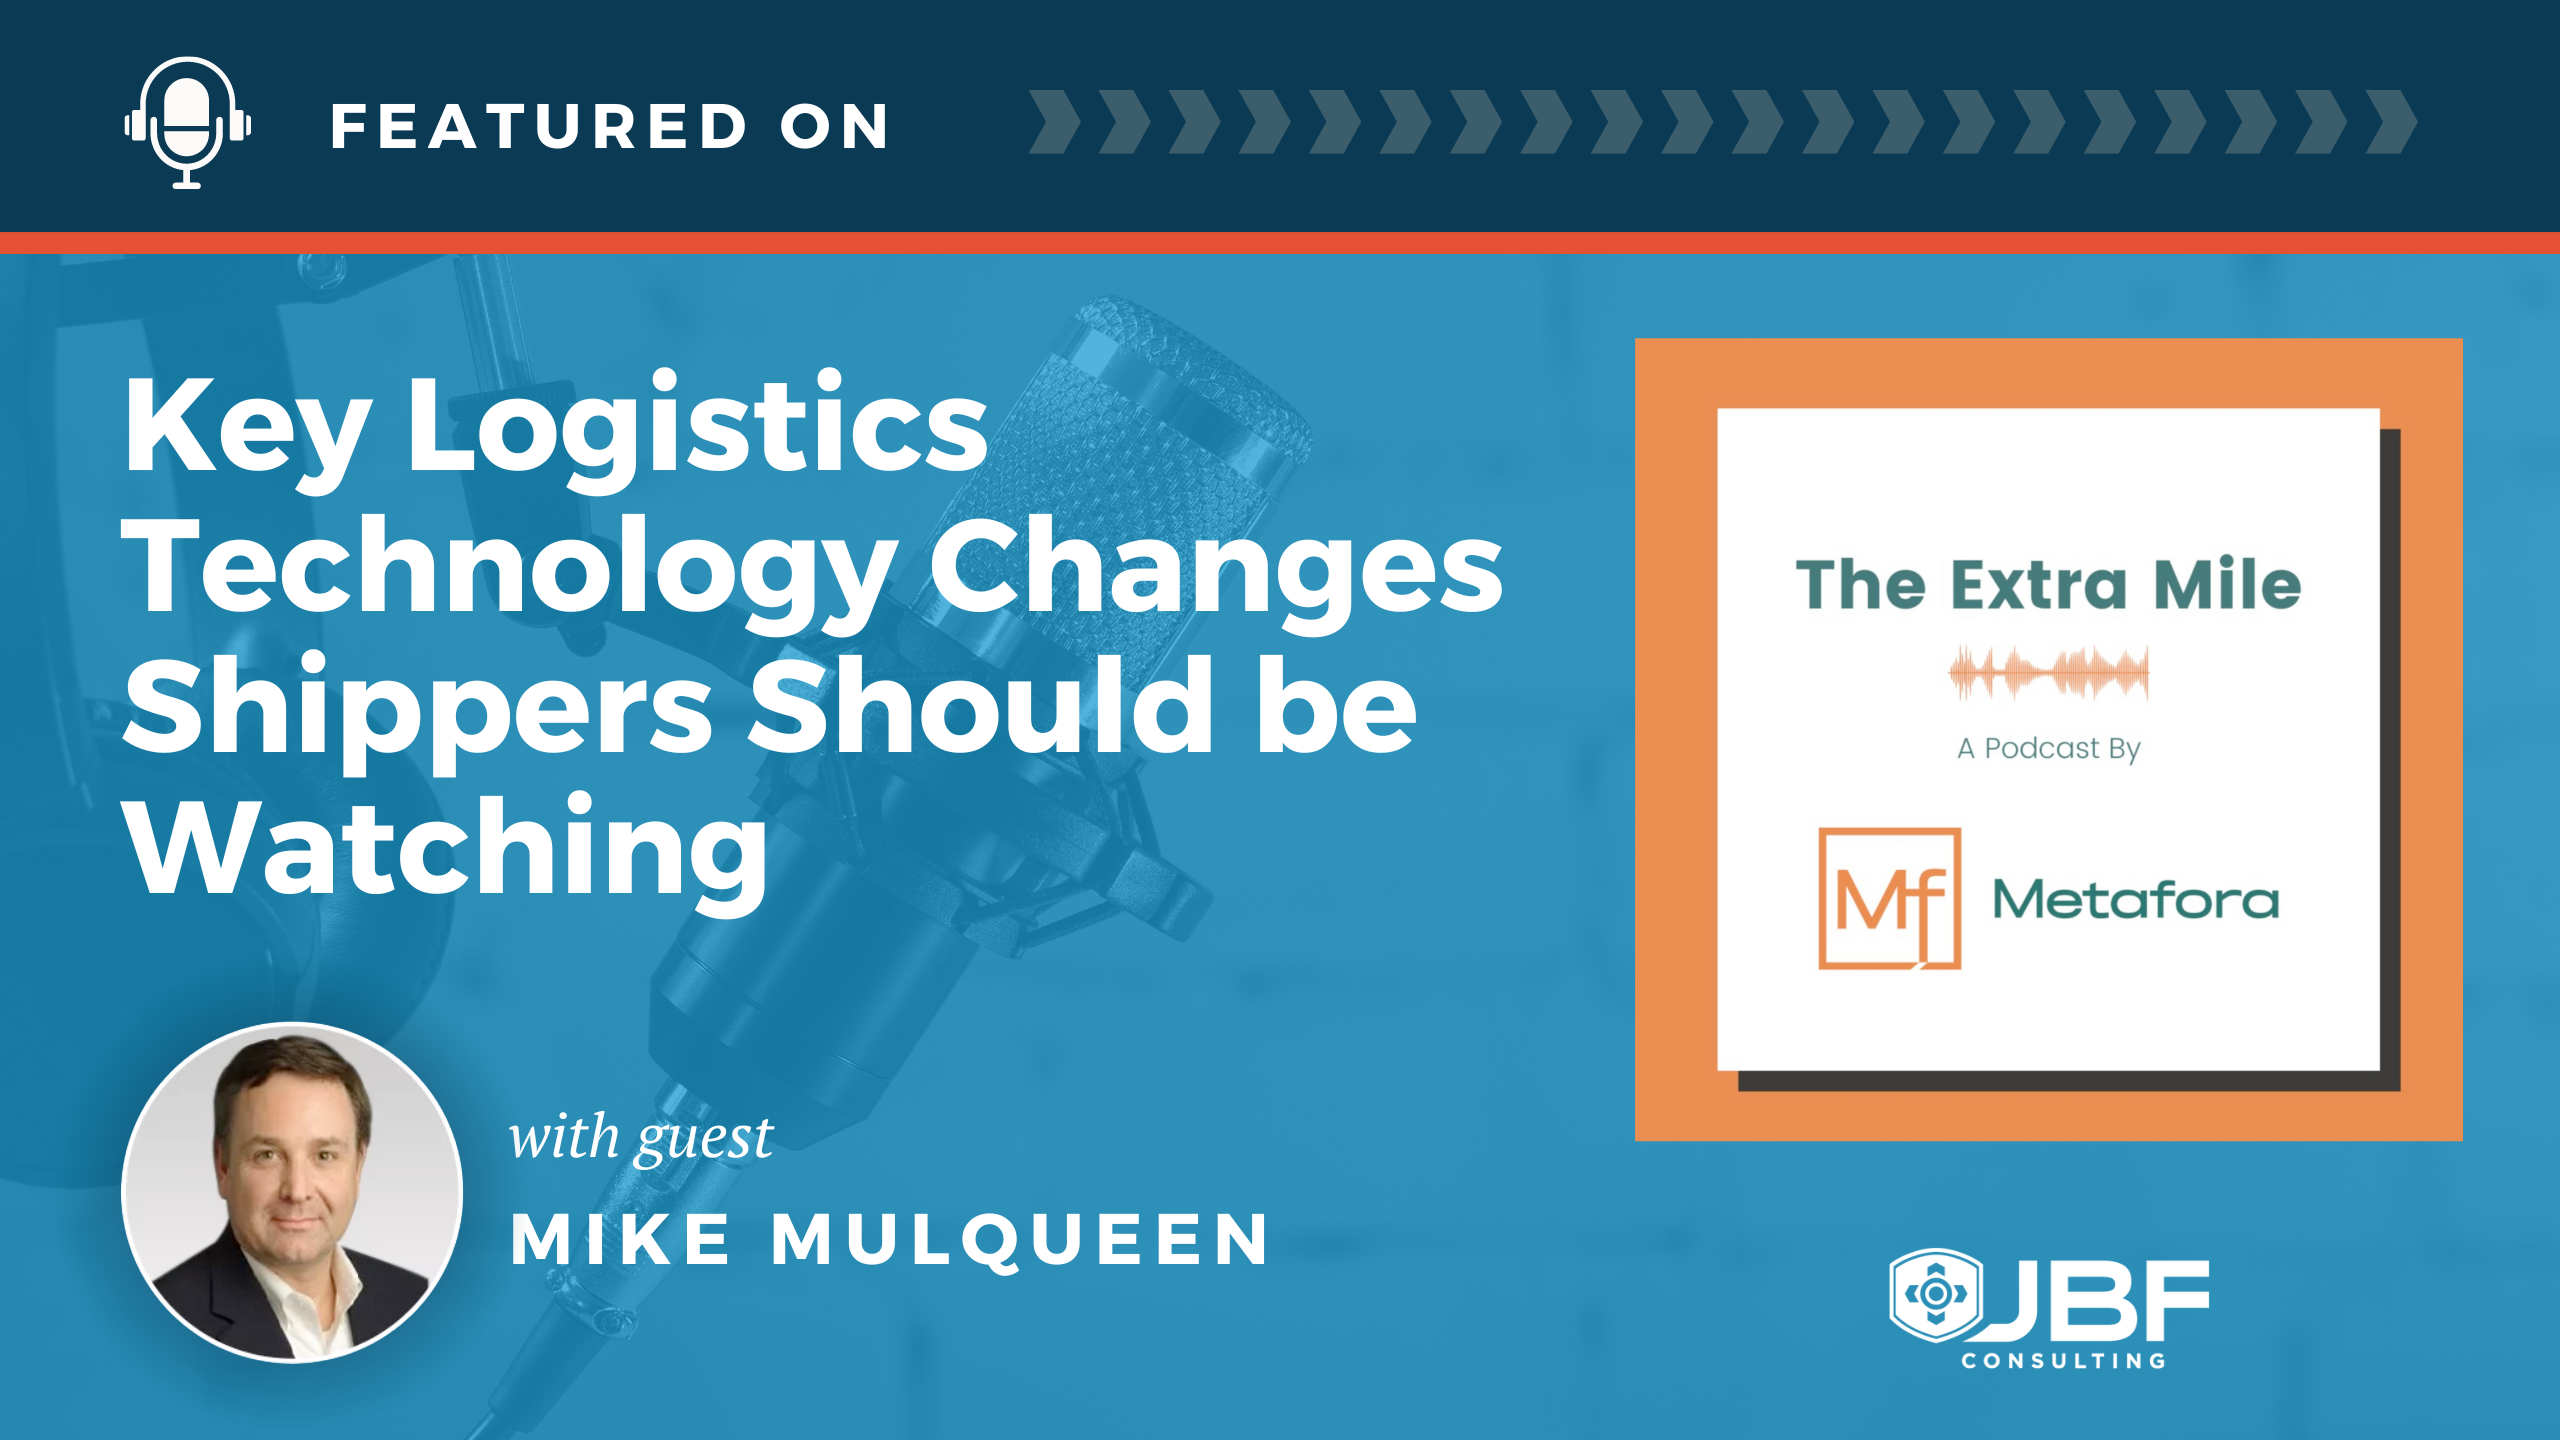 The Extra Mile -Mulqueen- Logistics Technology Changes